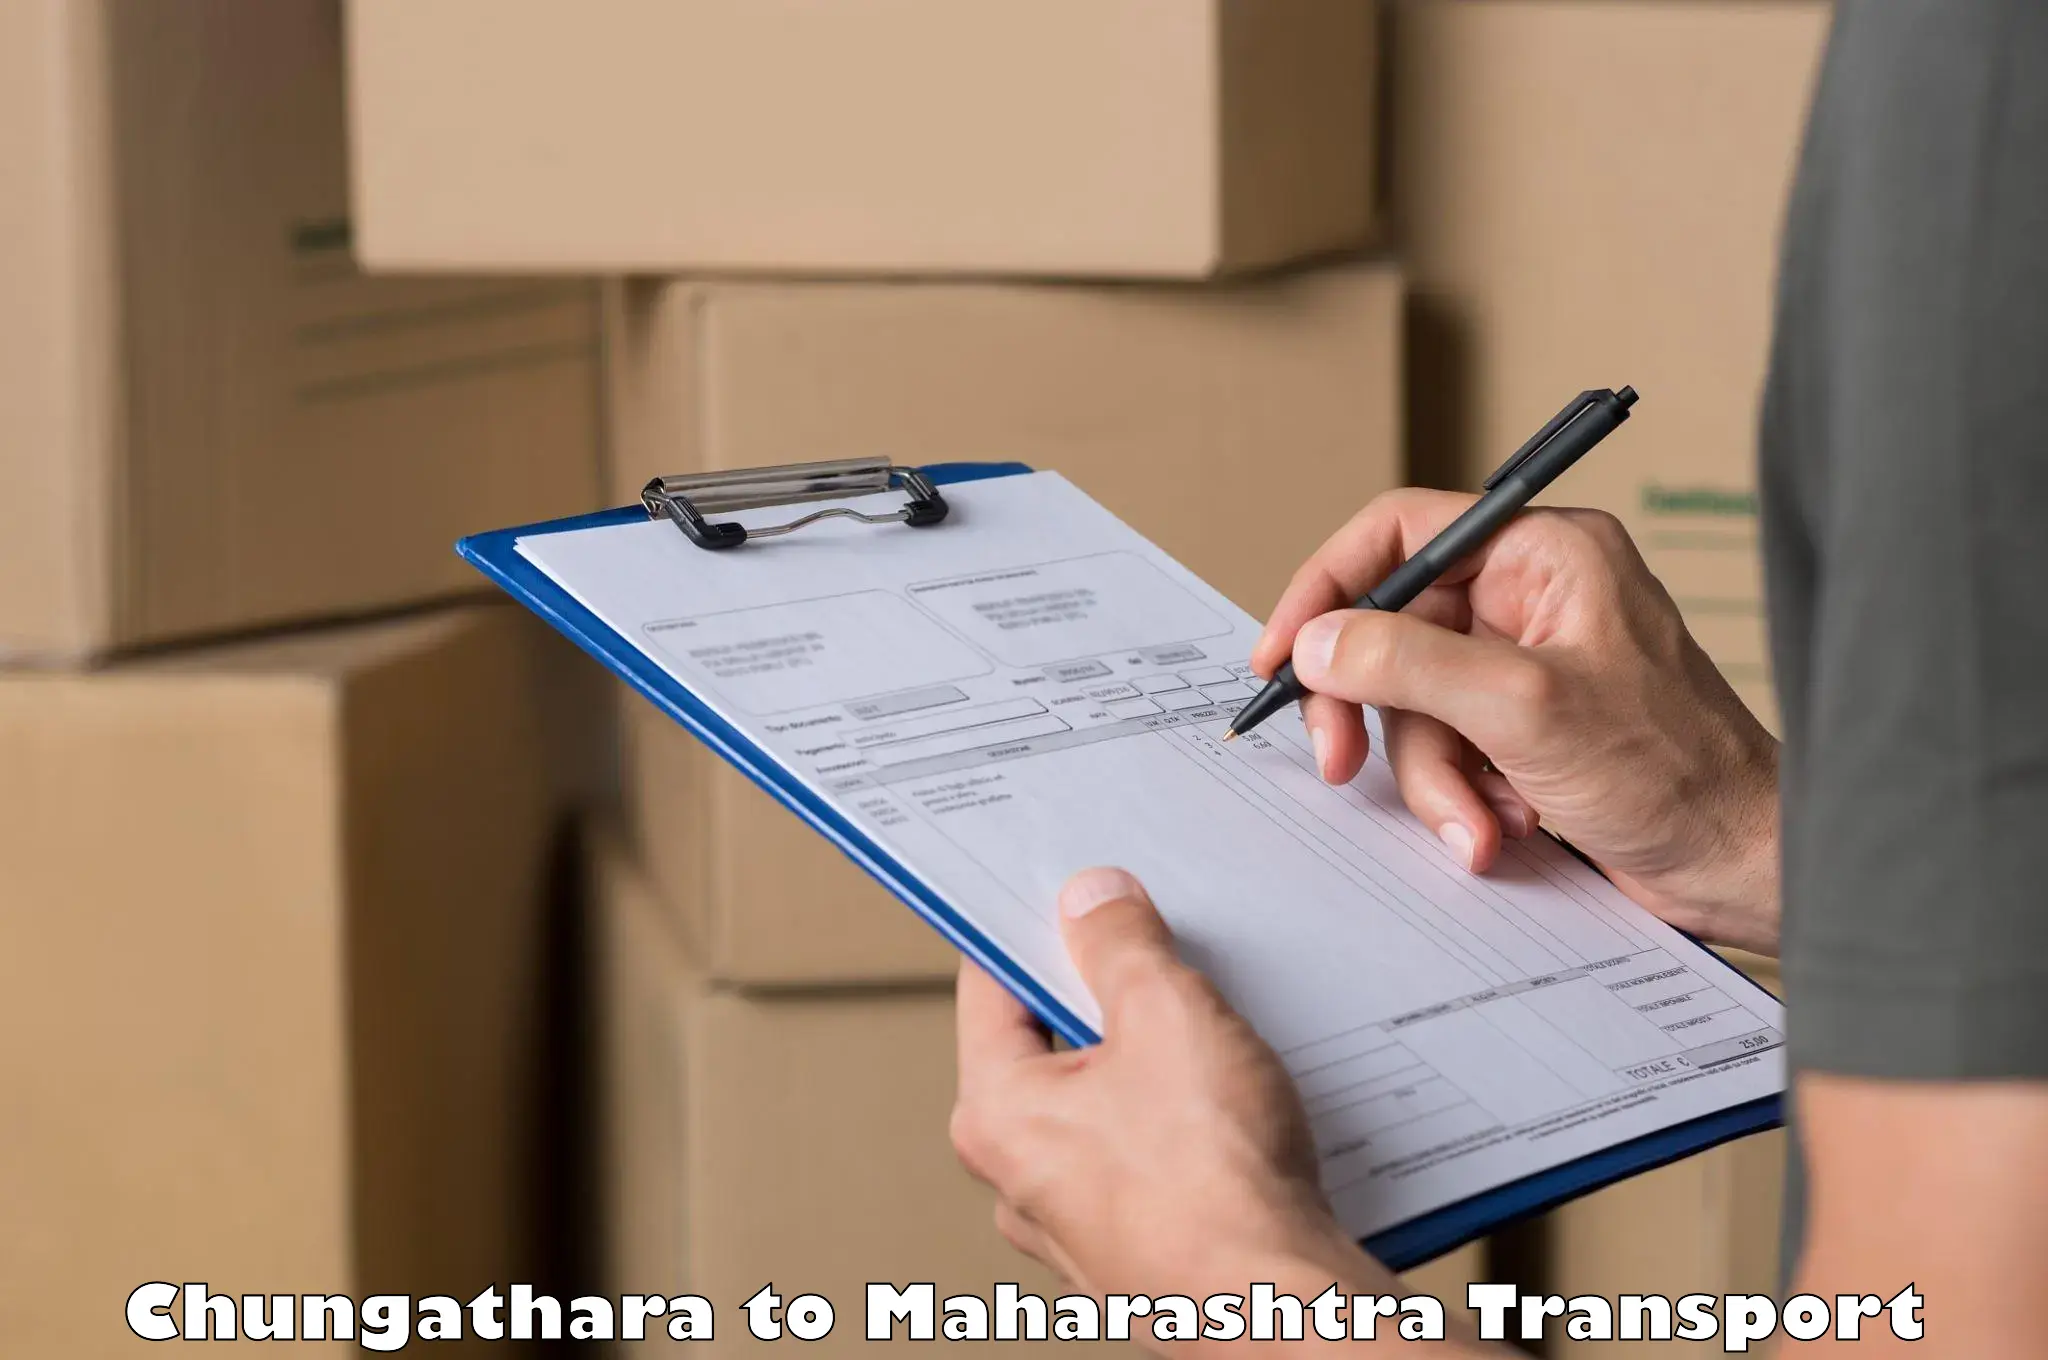 Truck transport companies in India Chungathara to Chiplun